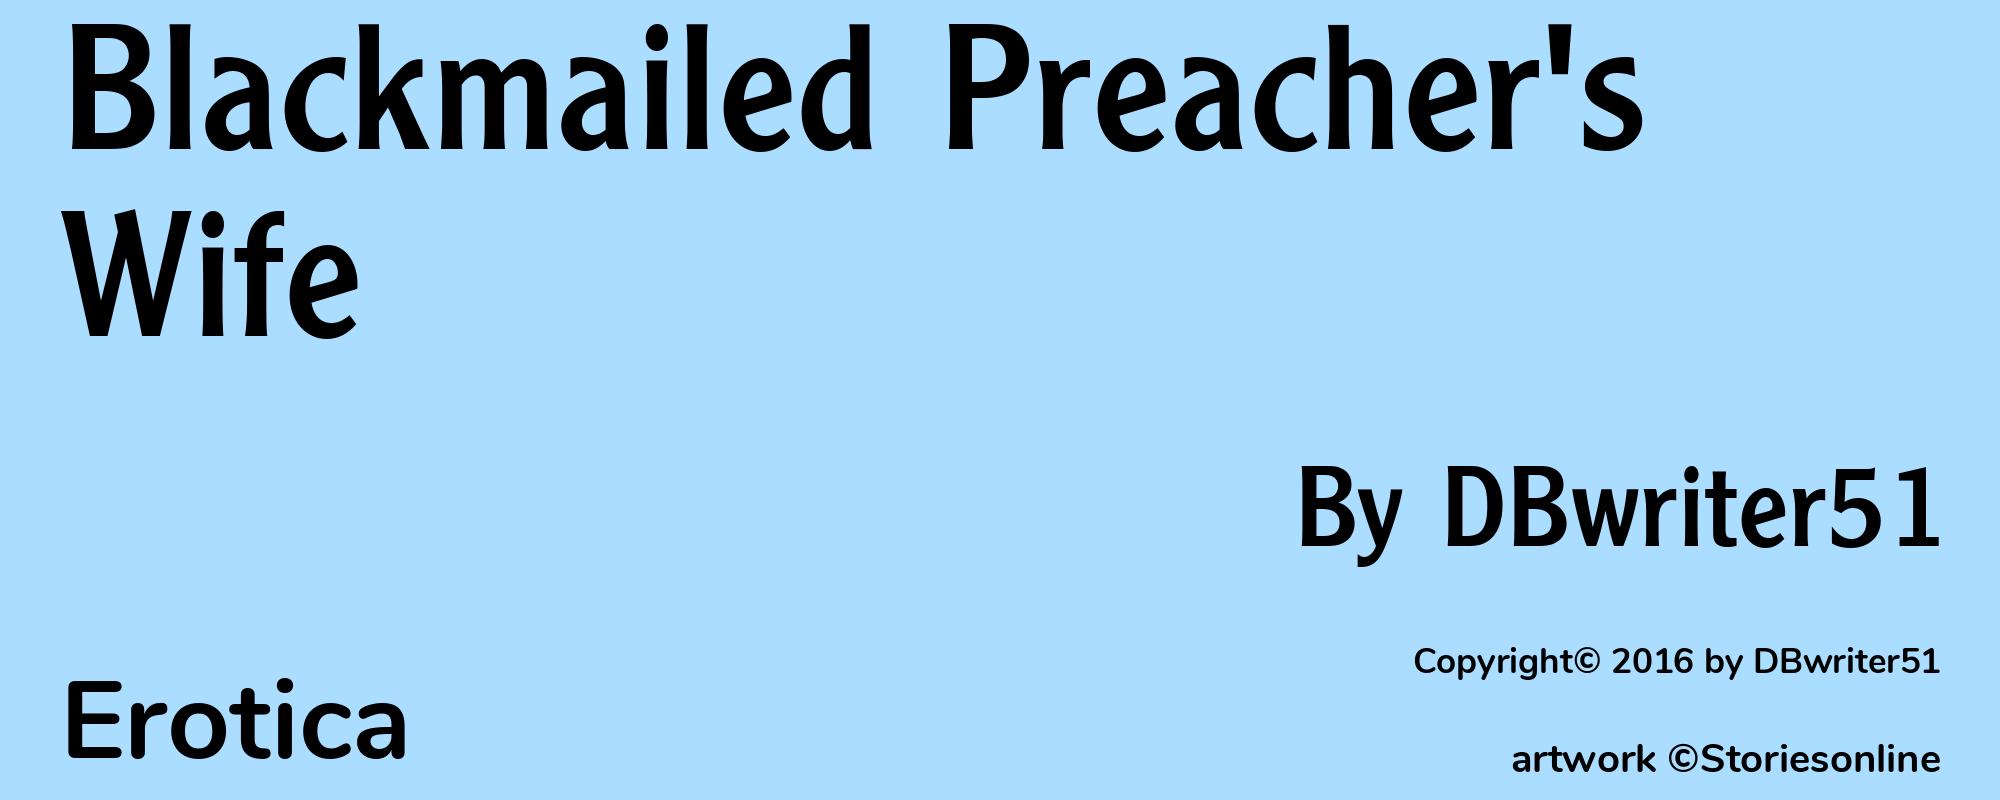 Blackmailed Preacher's Wife - Cover